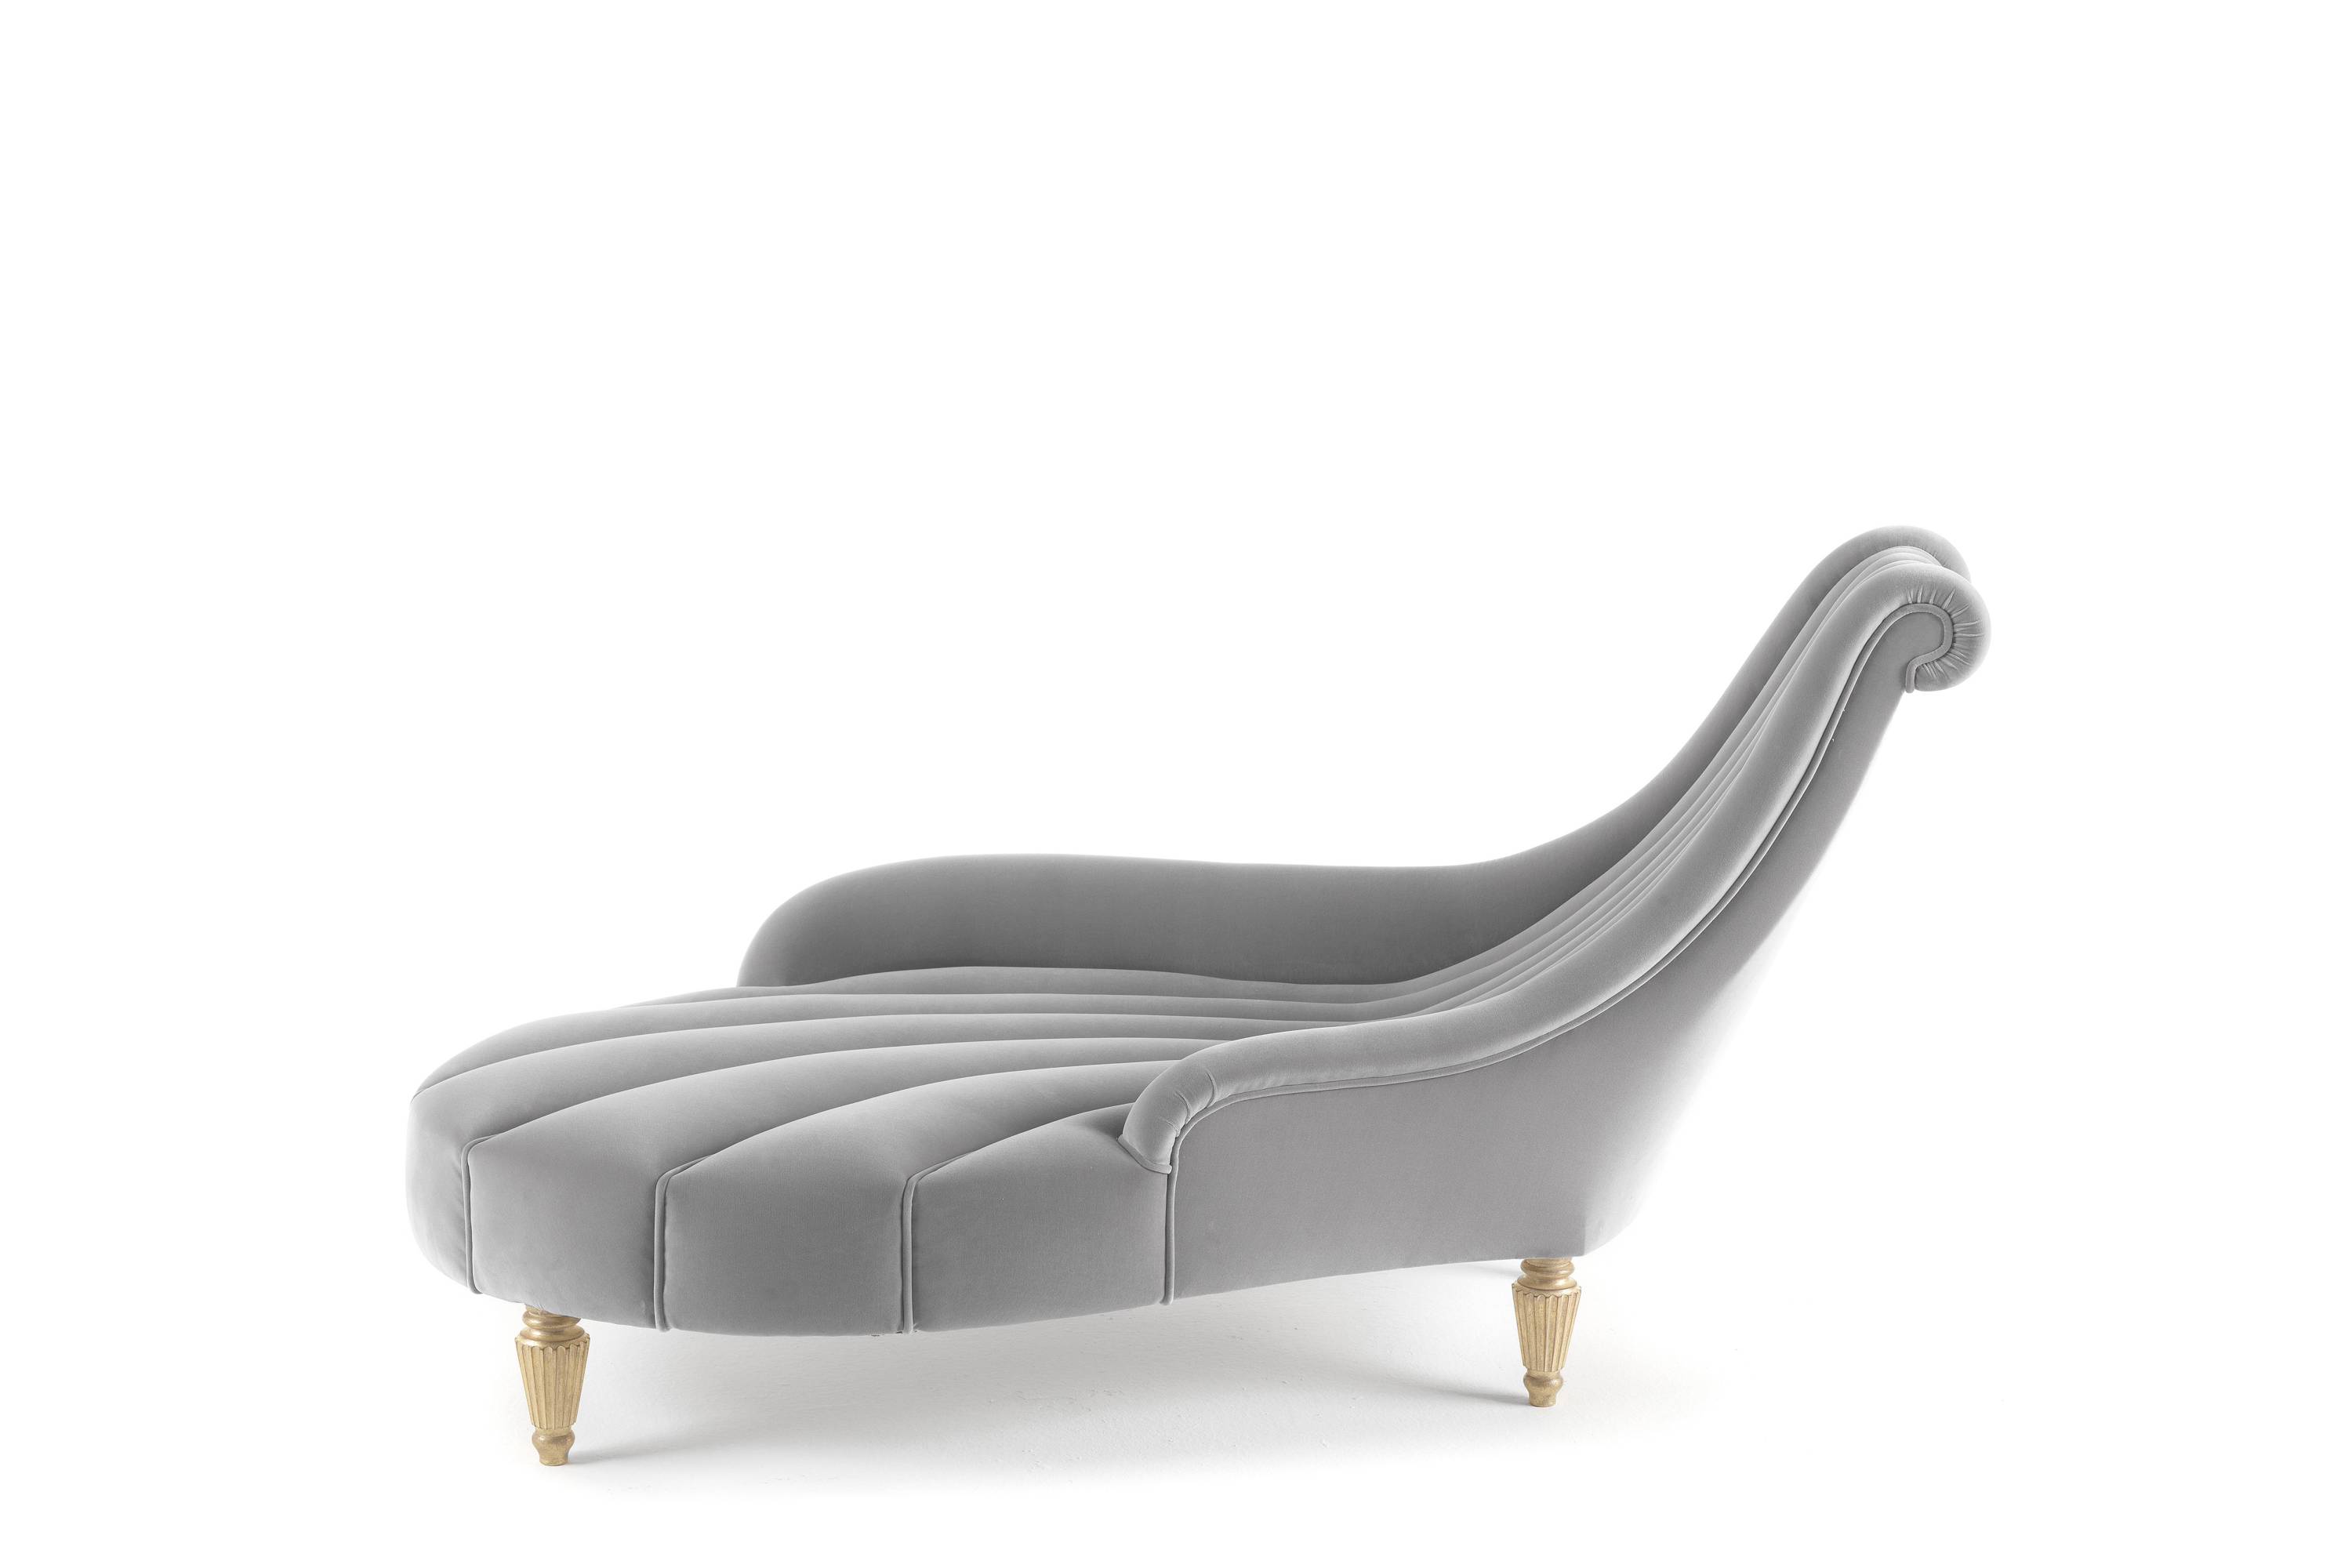 JUPITER dormeuse - Discover timeless elegance with Jumbo Collection's Italian luxury chaise longues and dormeuses. 